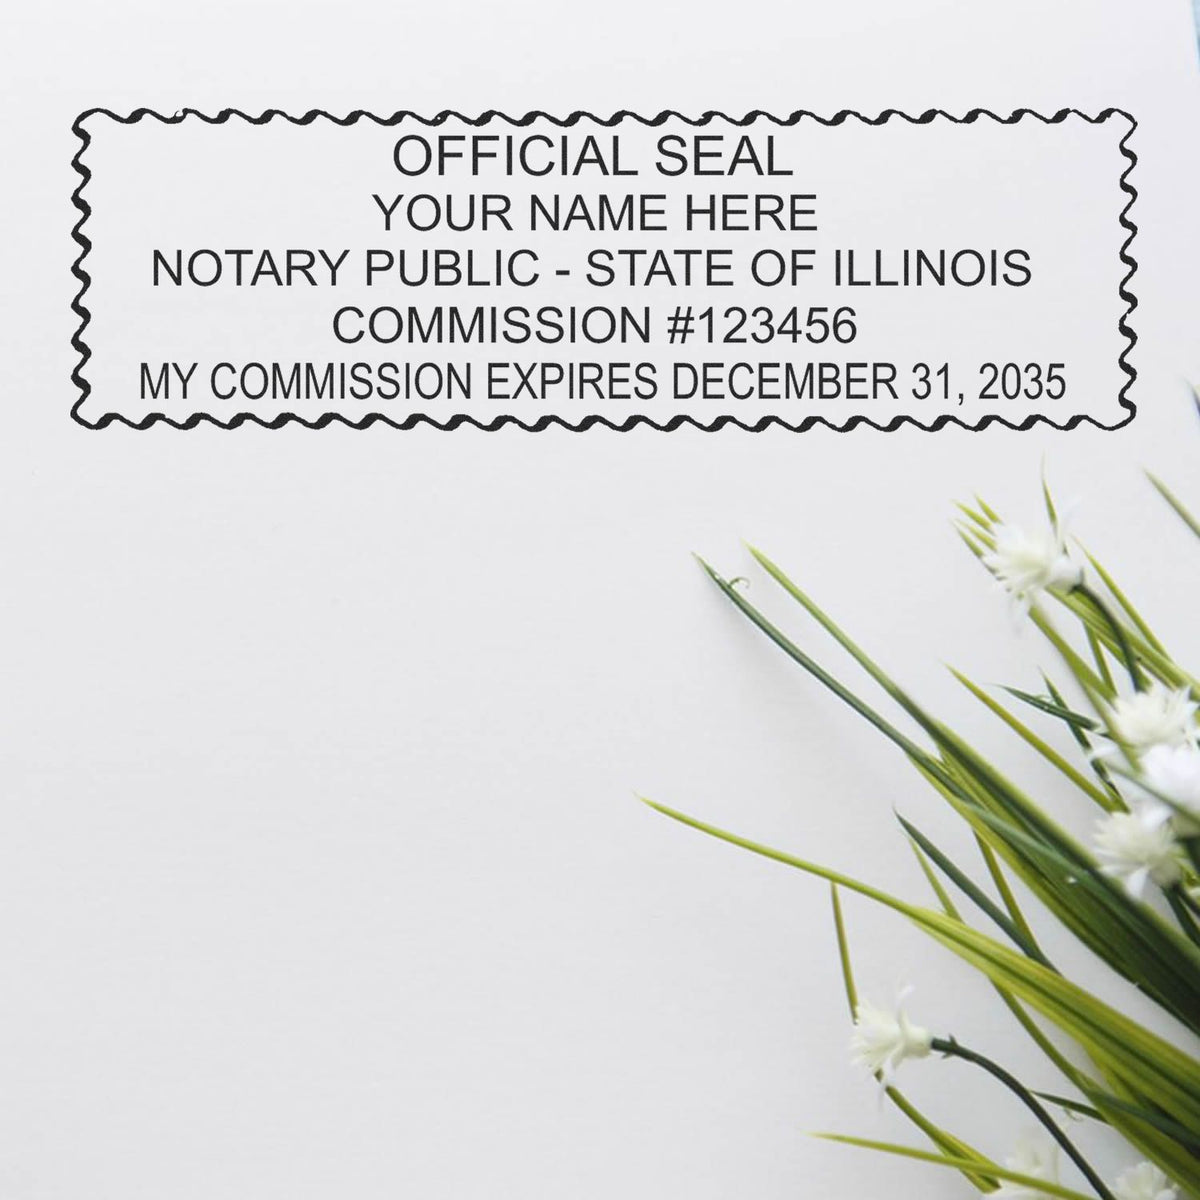 A stamped impression of the PSI Illinois Notary Stamp in this stylish lifestyle photo, setting the tone for a unique and personalized product.